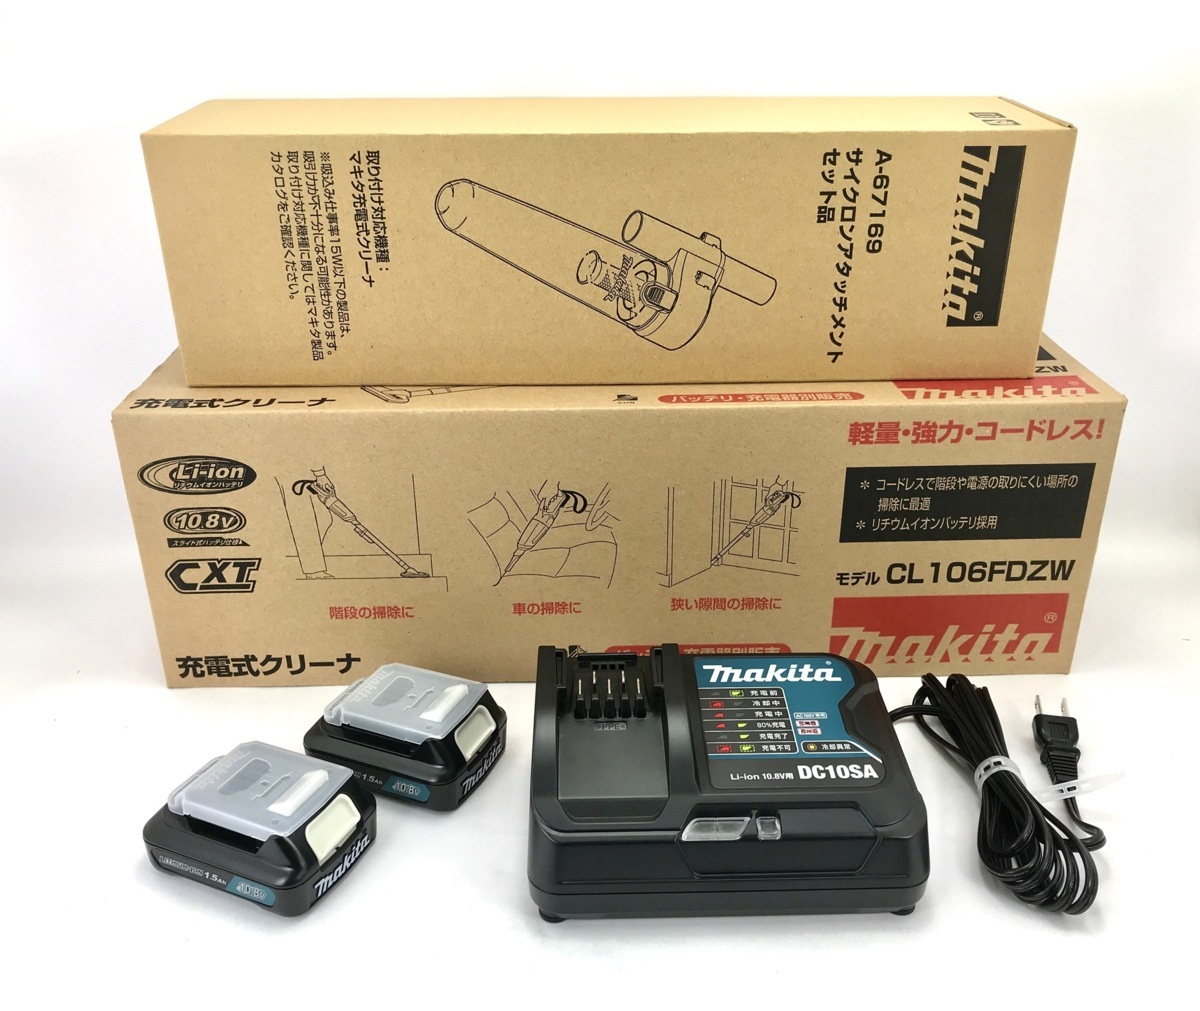  new goods Makita rechargeable cleaner CL106FDZW body + battery 2 piece + charger ( CL106FDSHW same + preliminary battery )+ Cyclone Attachment 